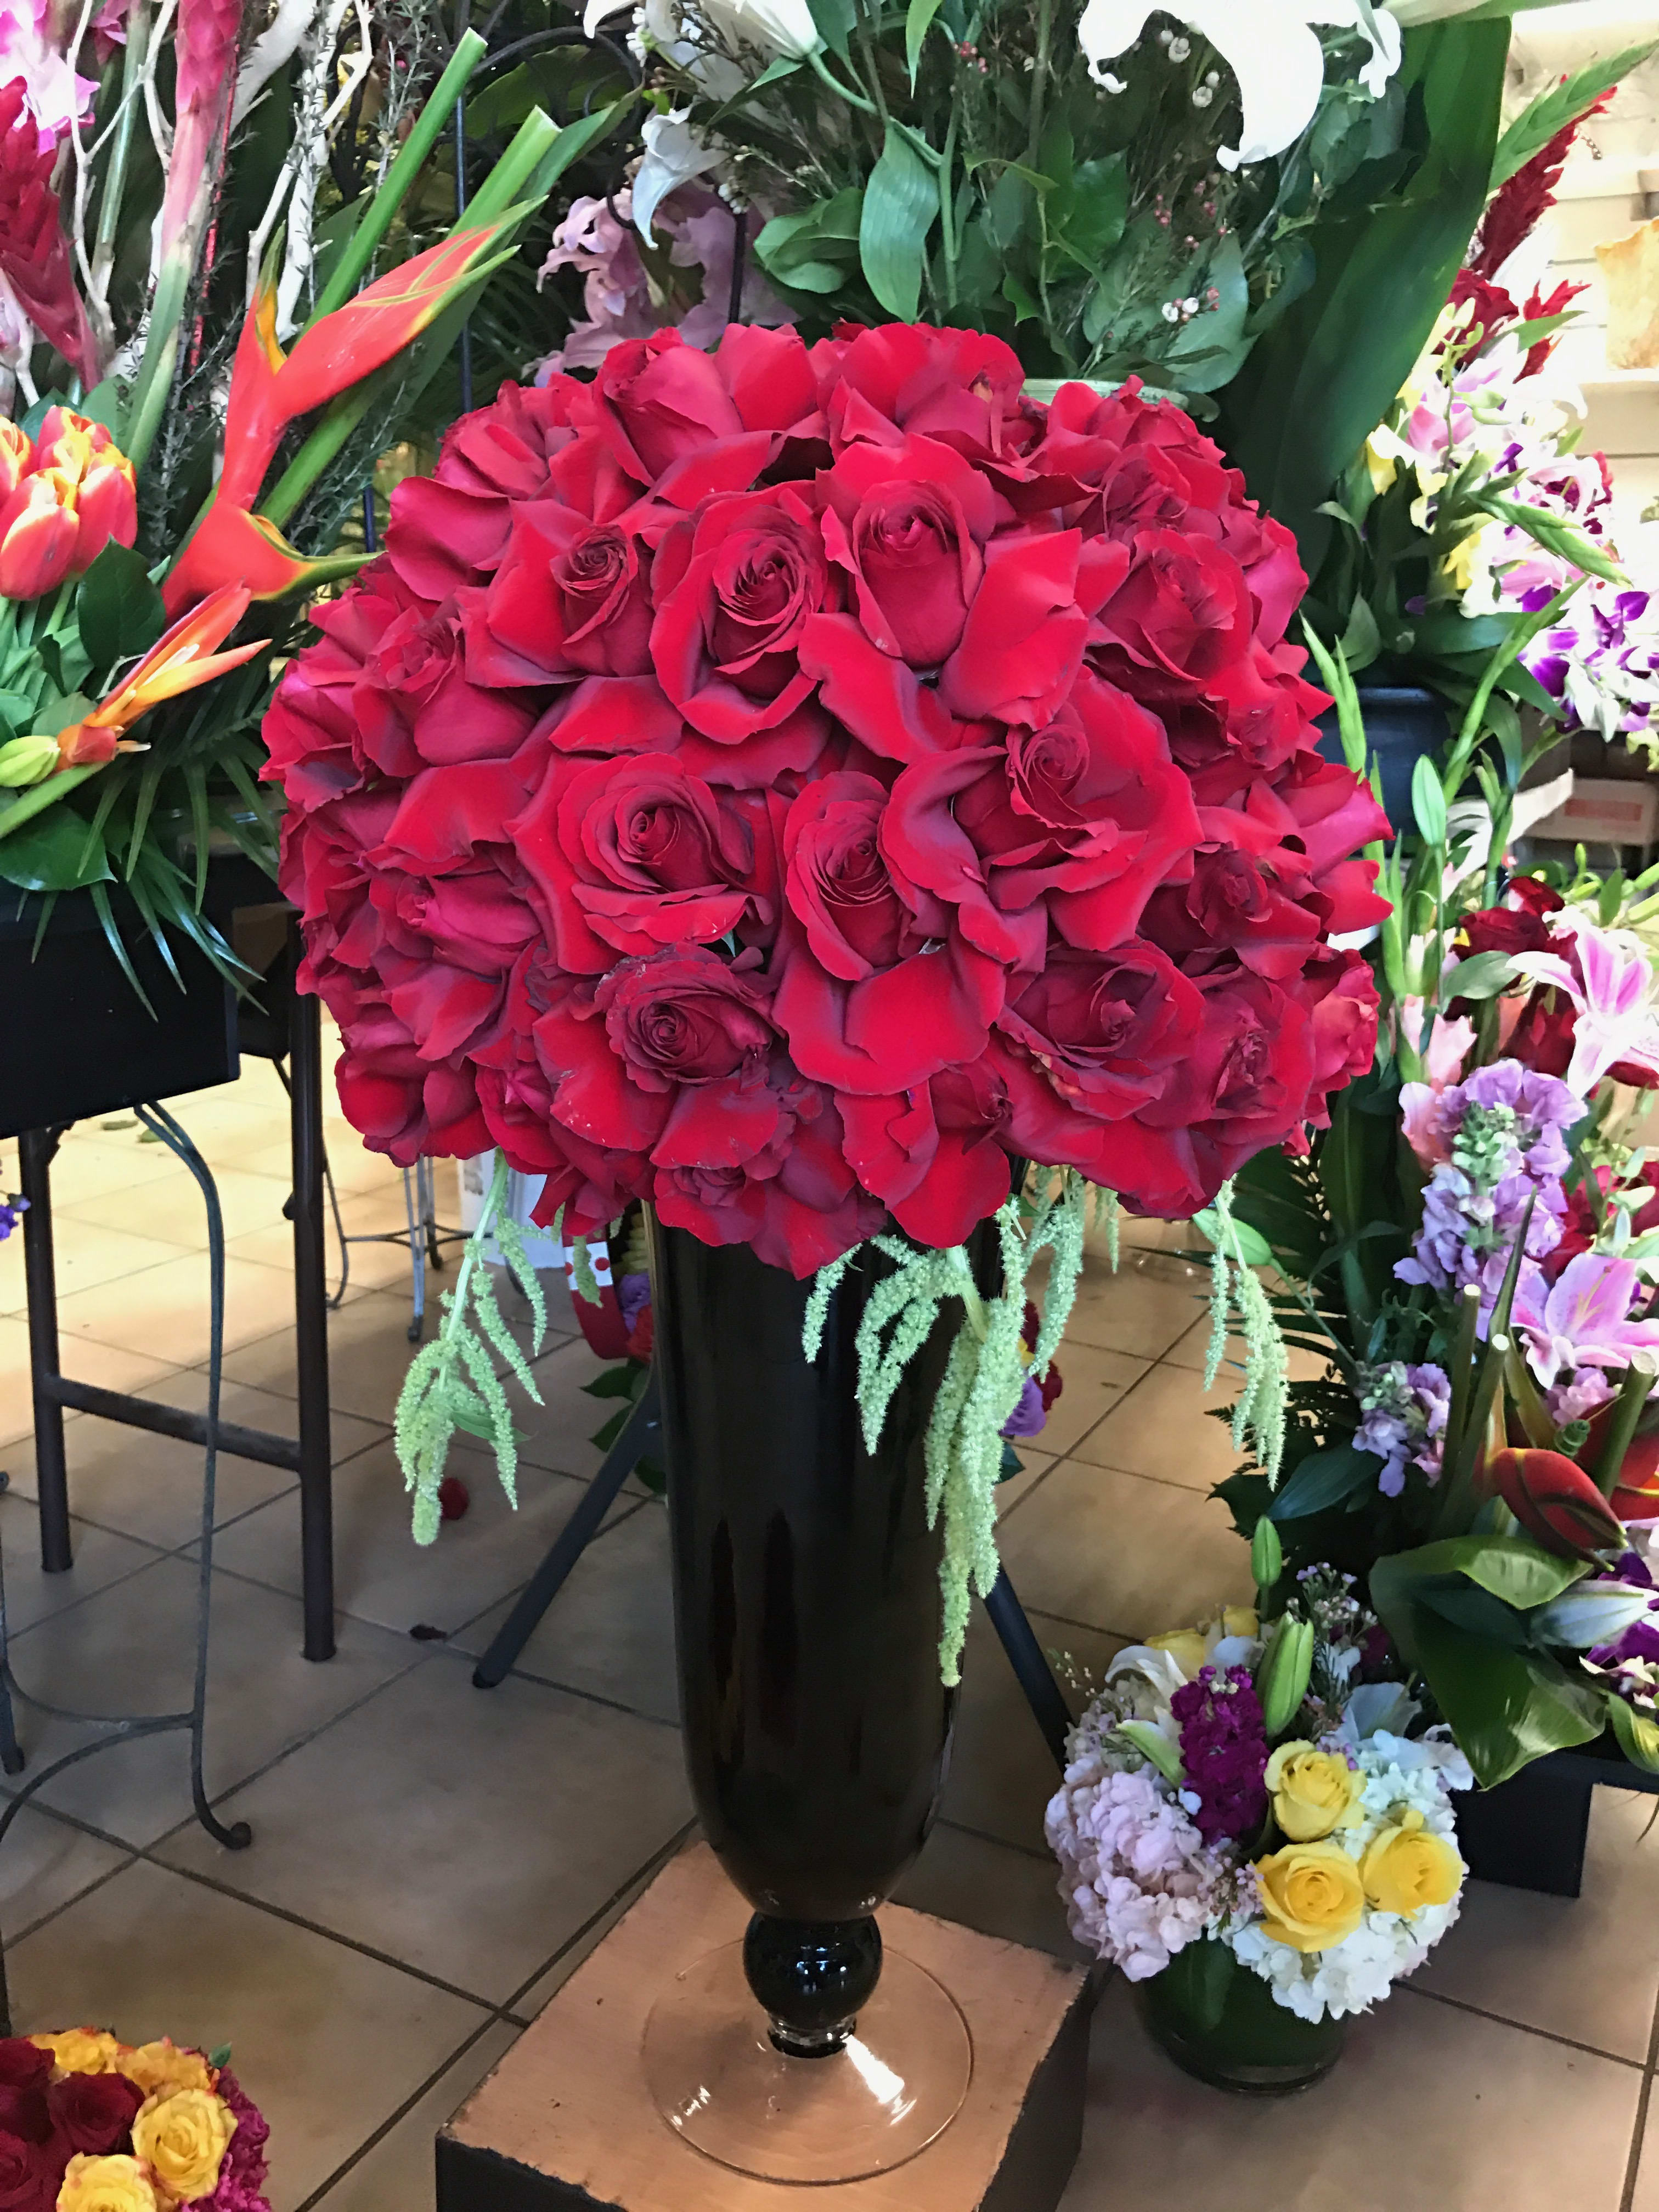 Centerpiece on top of a beautiful vase - This beautiful red centerpiece will surely catch the eye of everyone as it sits on top of a beautiful tall black vase. The gift that will make catch everyone's attention.